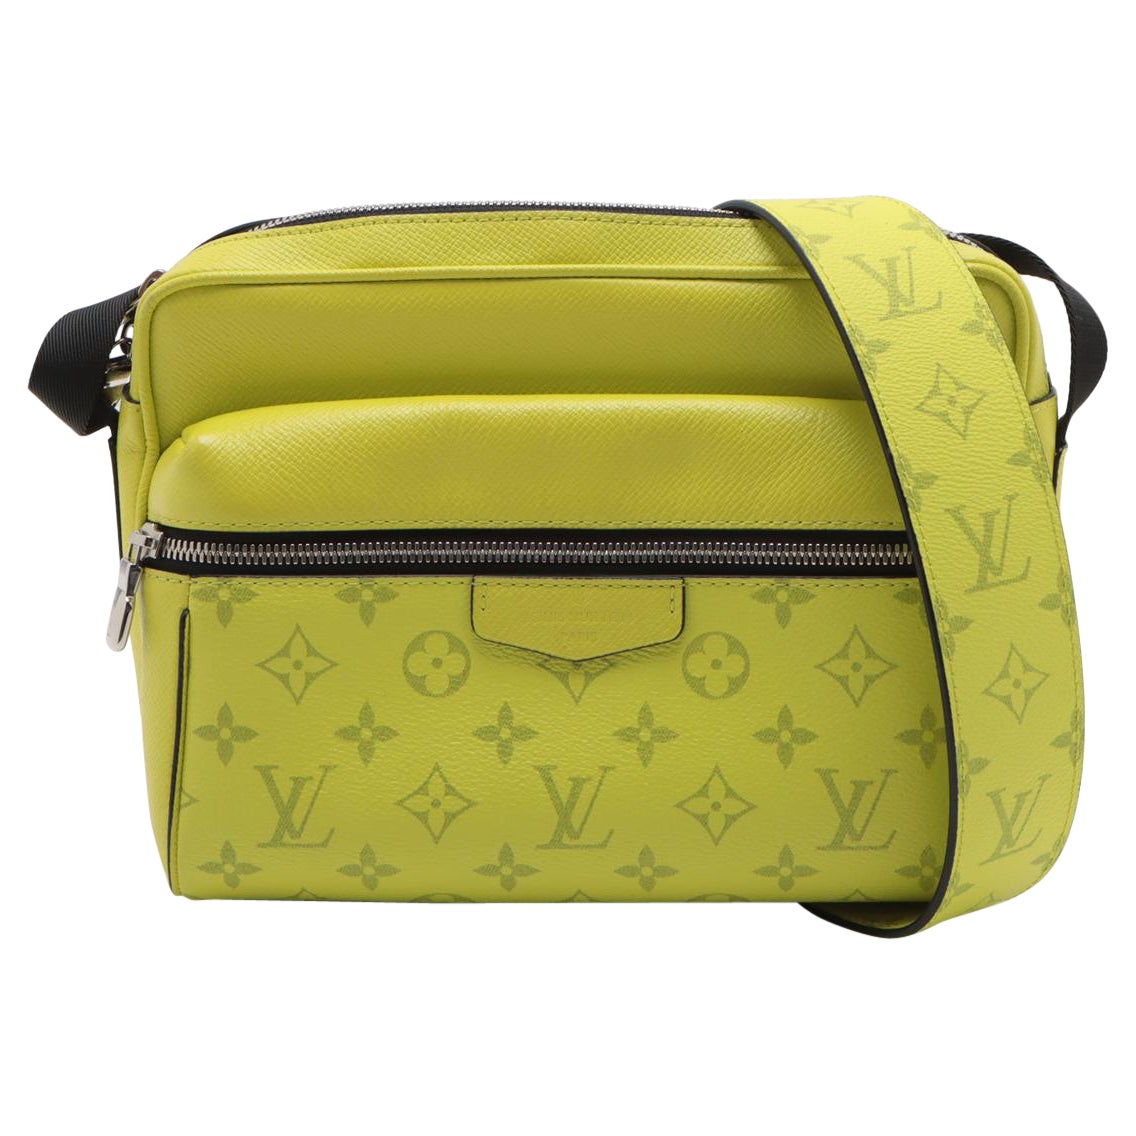 How do I read a date code on Louis Vuitton?